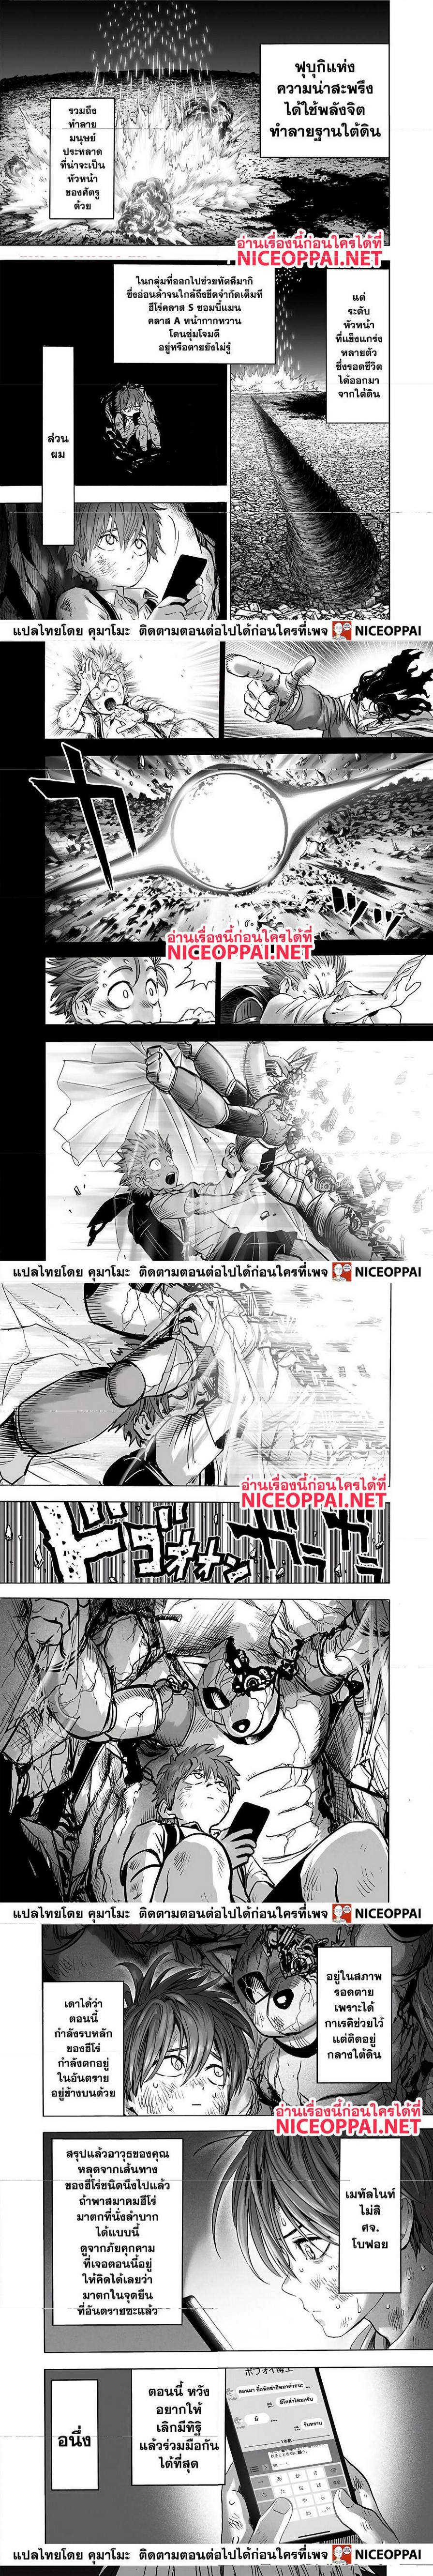 One Punch Man149 (6)